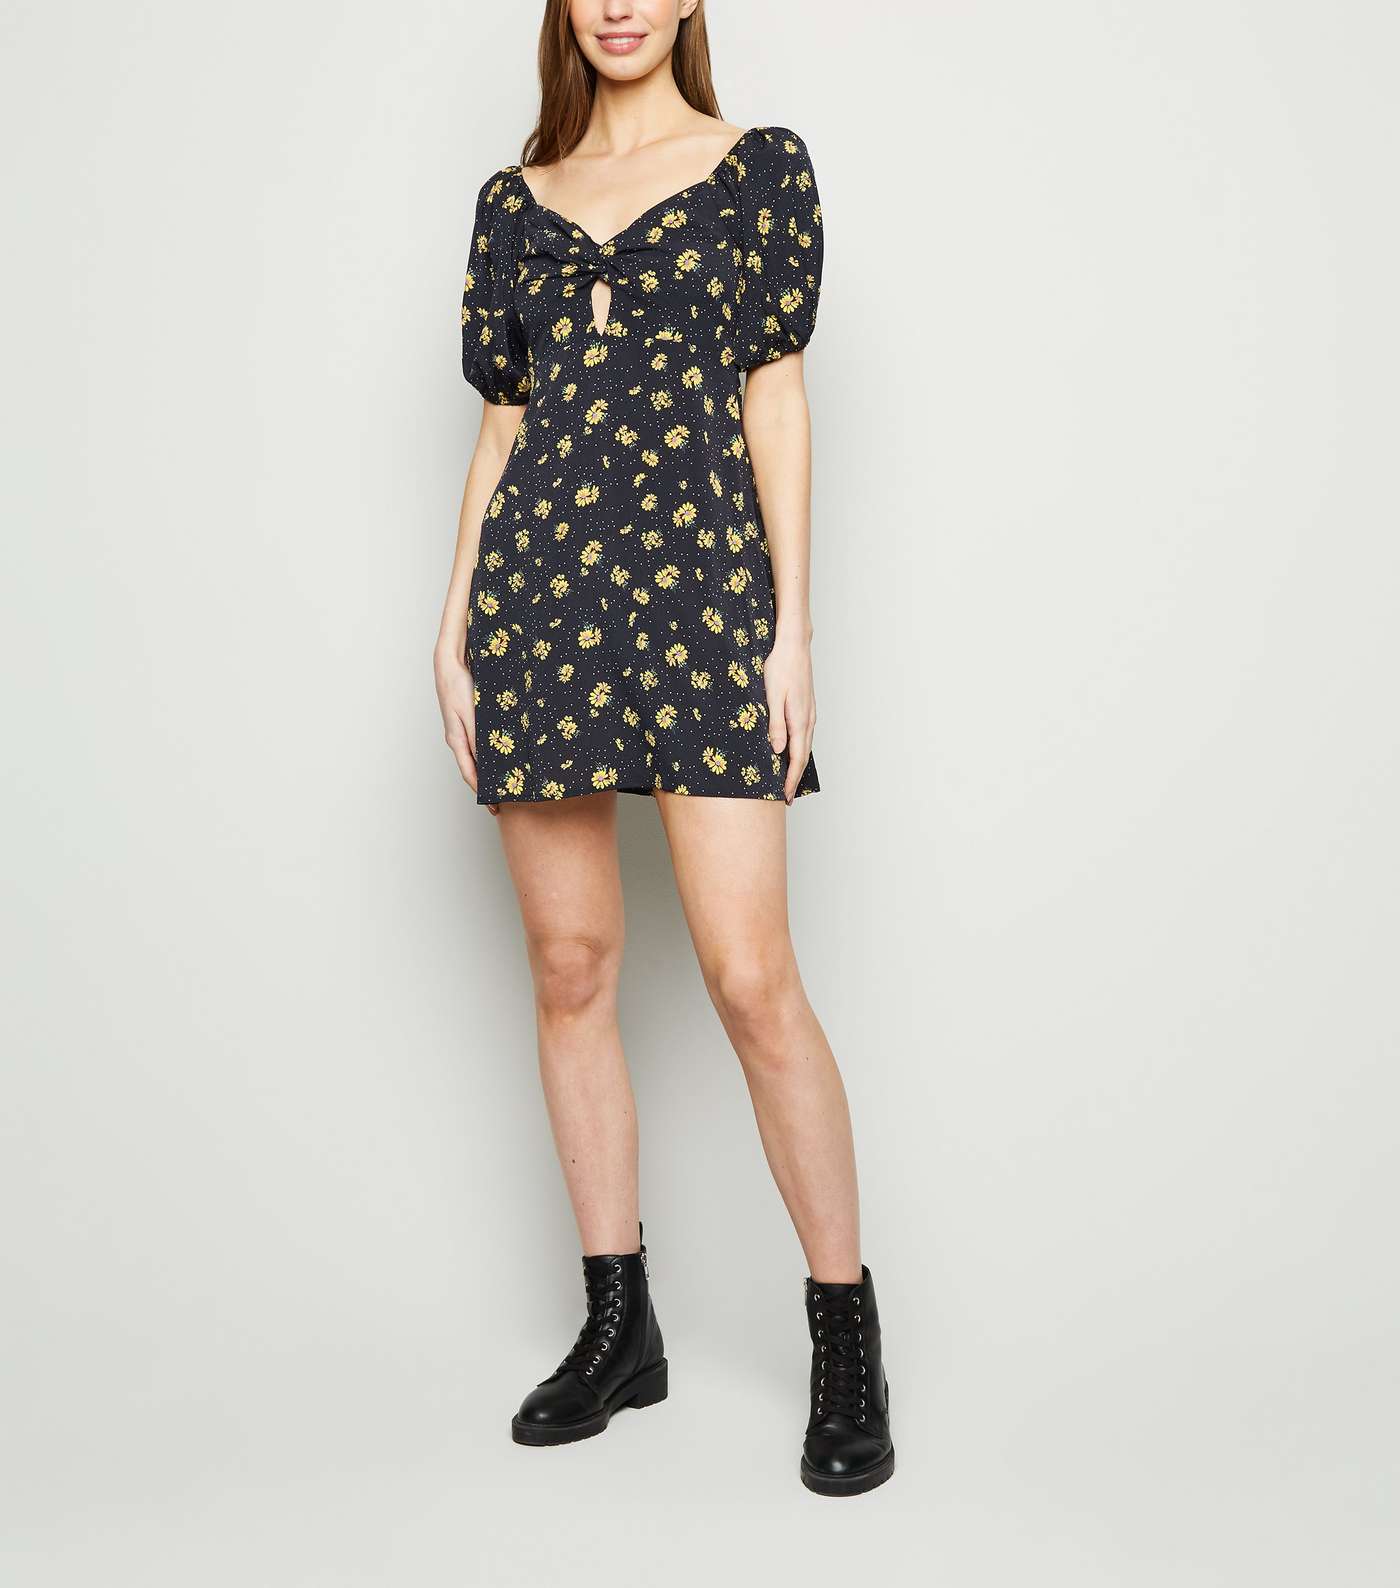 Urban Bliss Yellow Floral and Spot Mini Dress Image 2